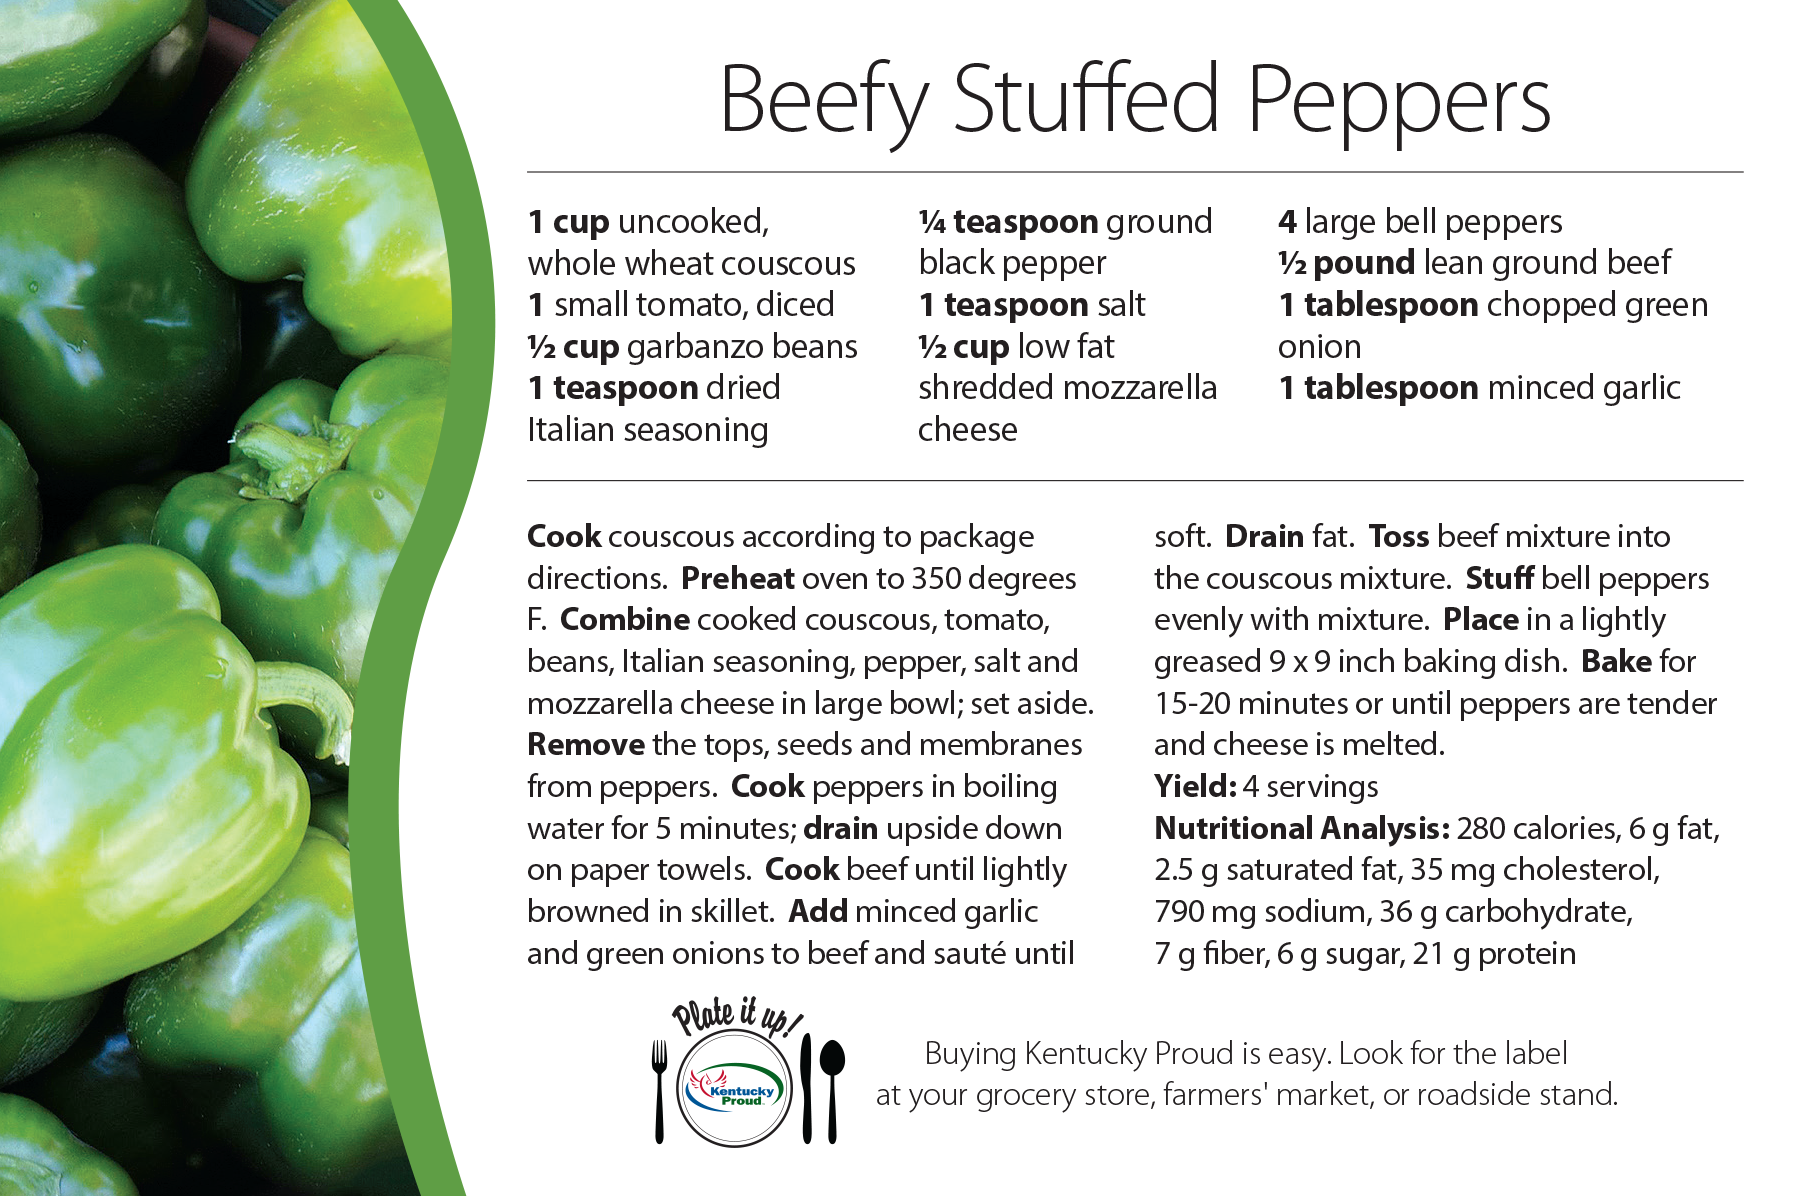 Recipe for Beefy Stuffed Peppers